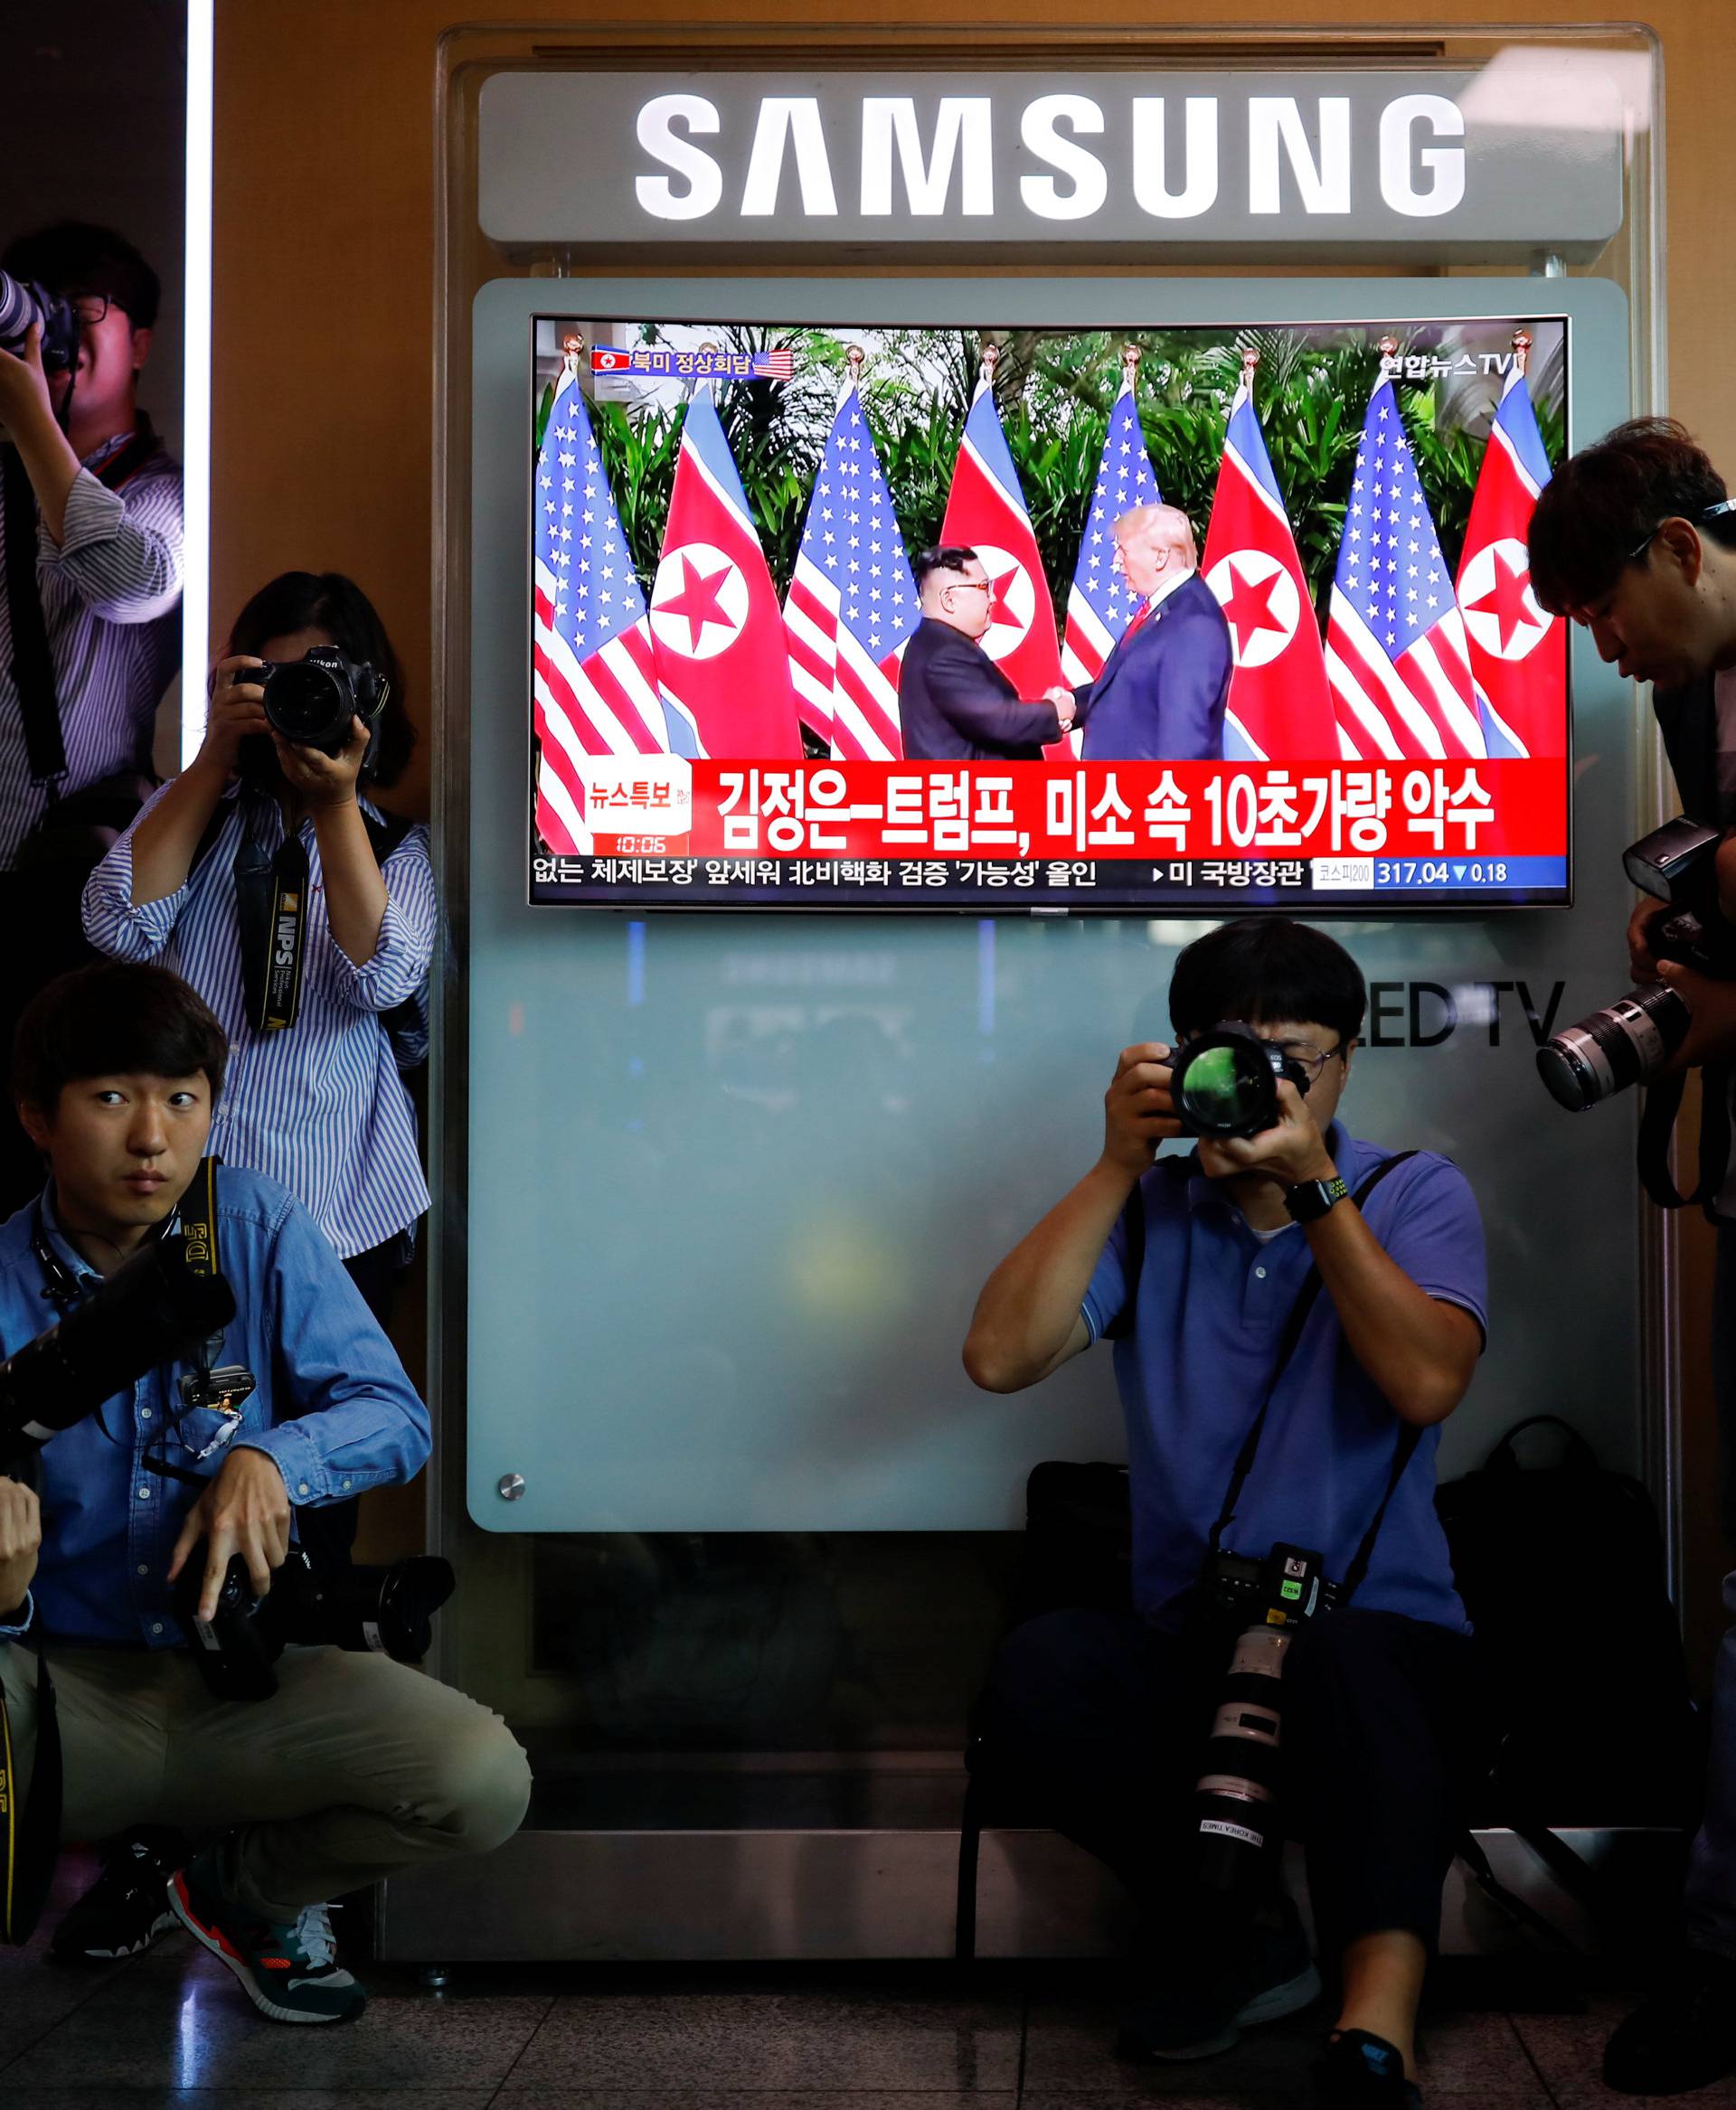 Photographers surround a TV broadcasting a news report on summit between the U.S. and North Korea, in Seoul